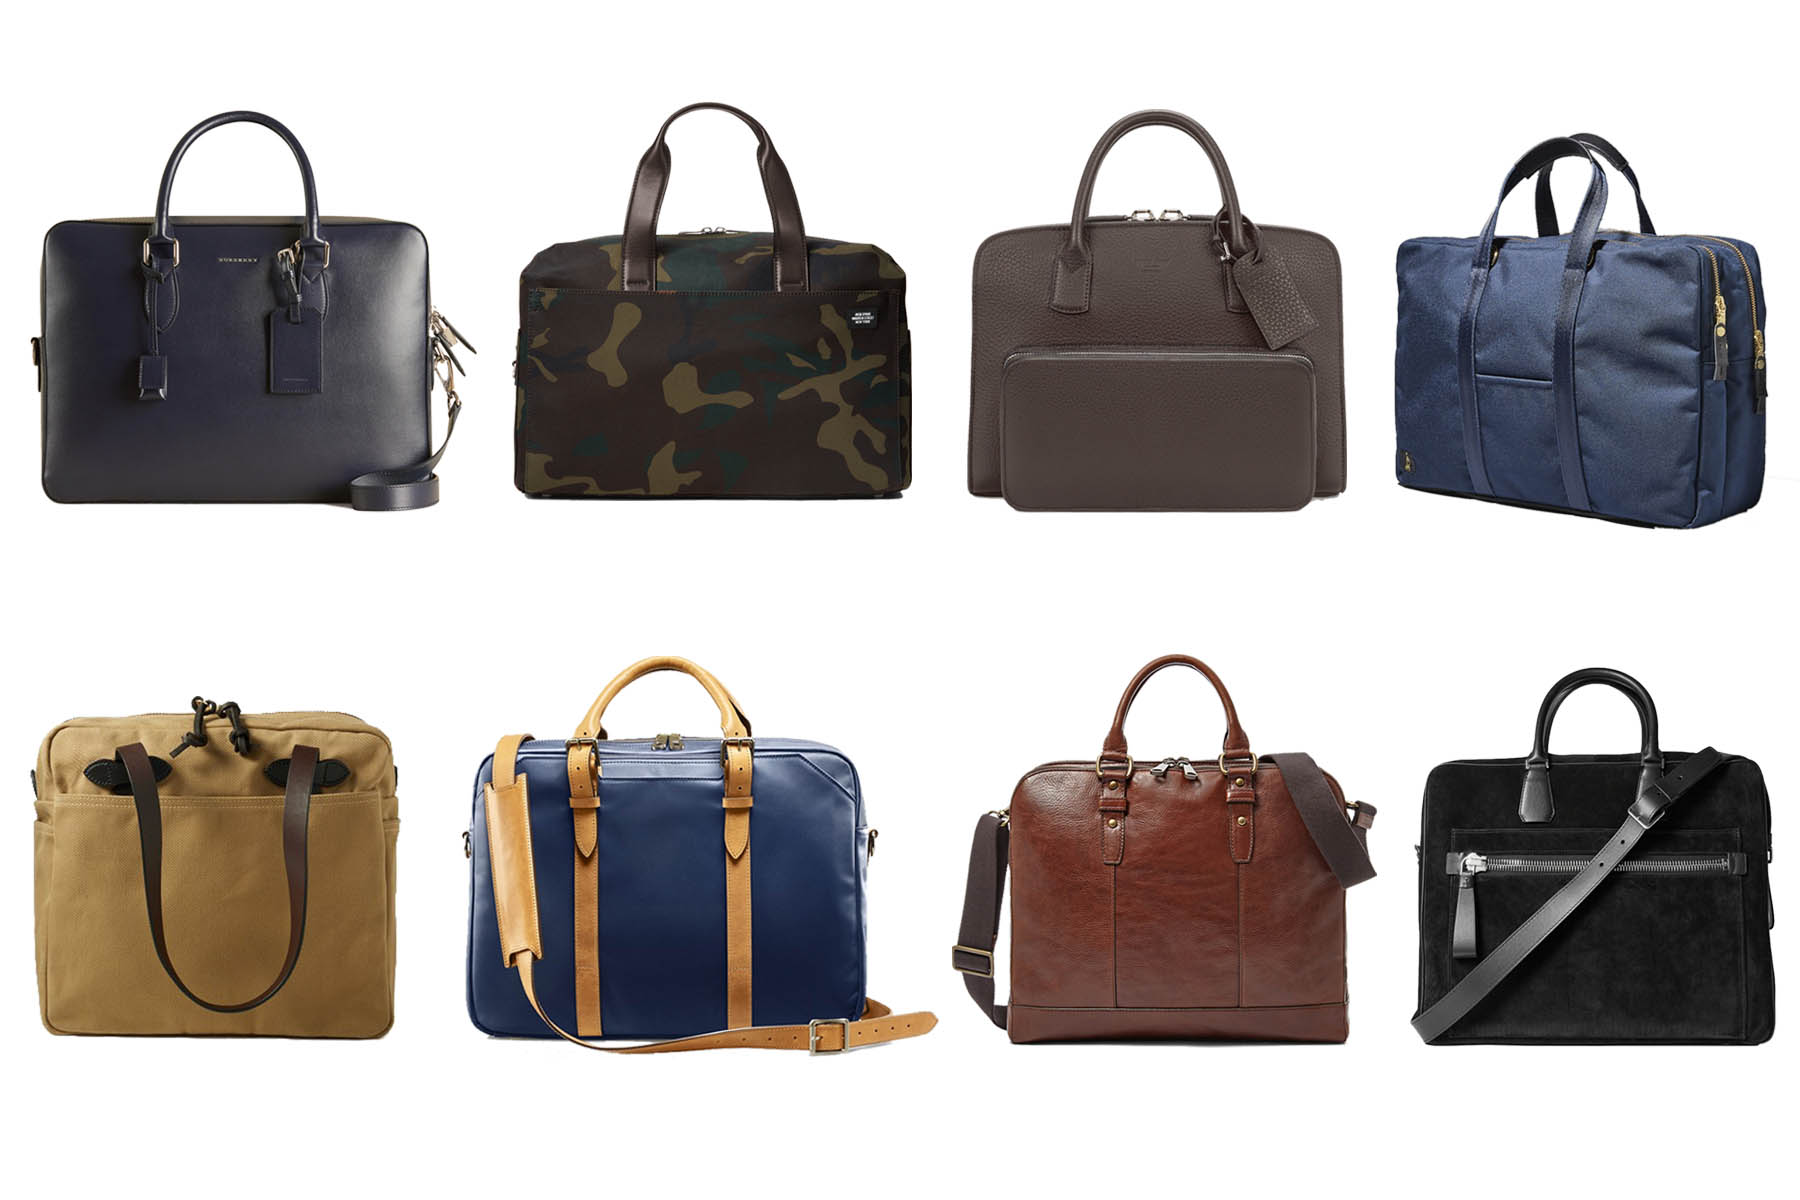 Meet the 'Carry Case,' the Only Men’s Bag You'll Need This Fall - Bloomberg